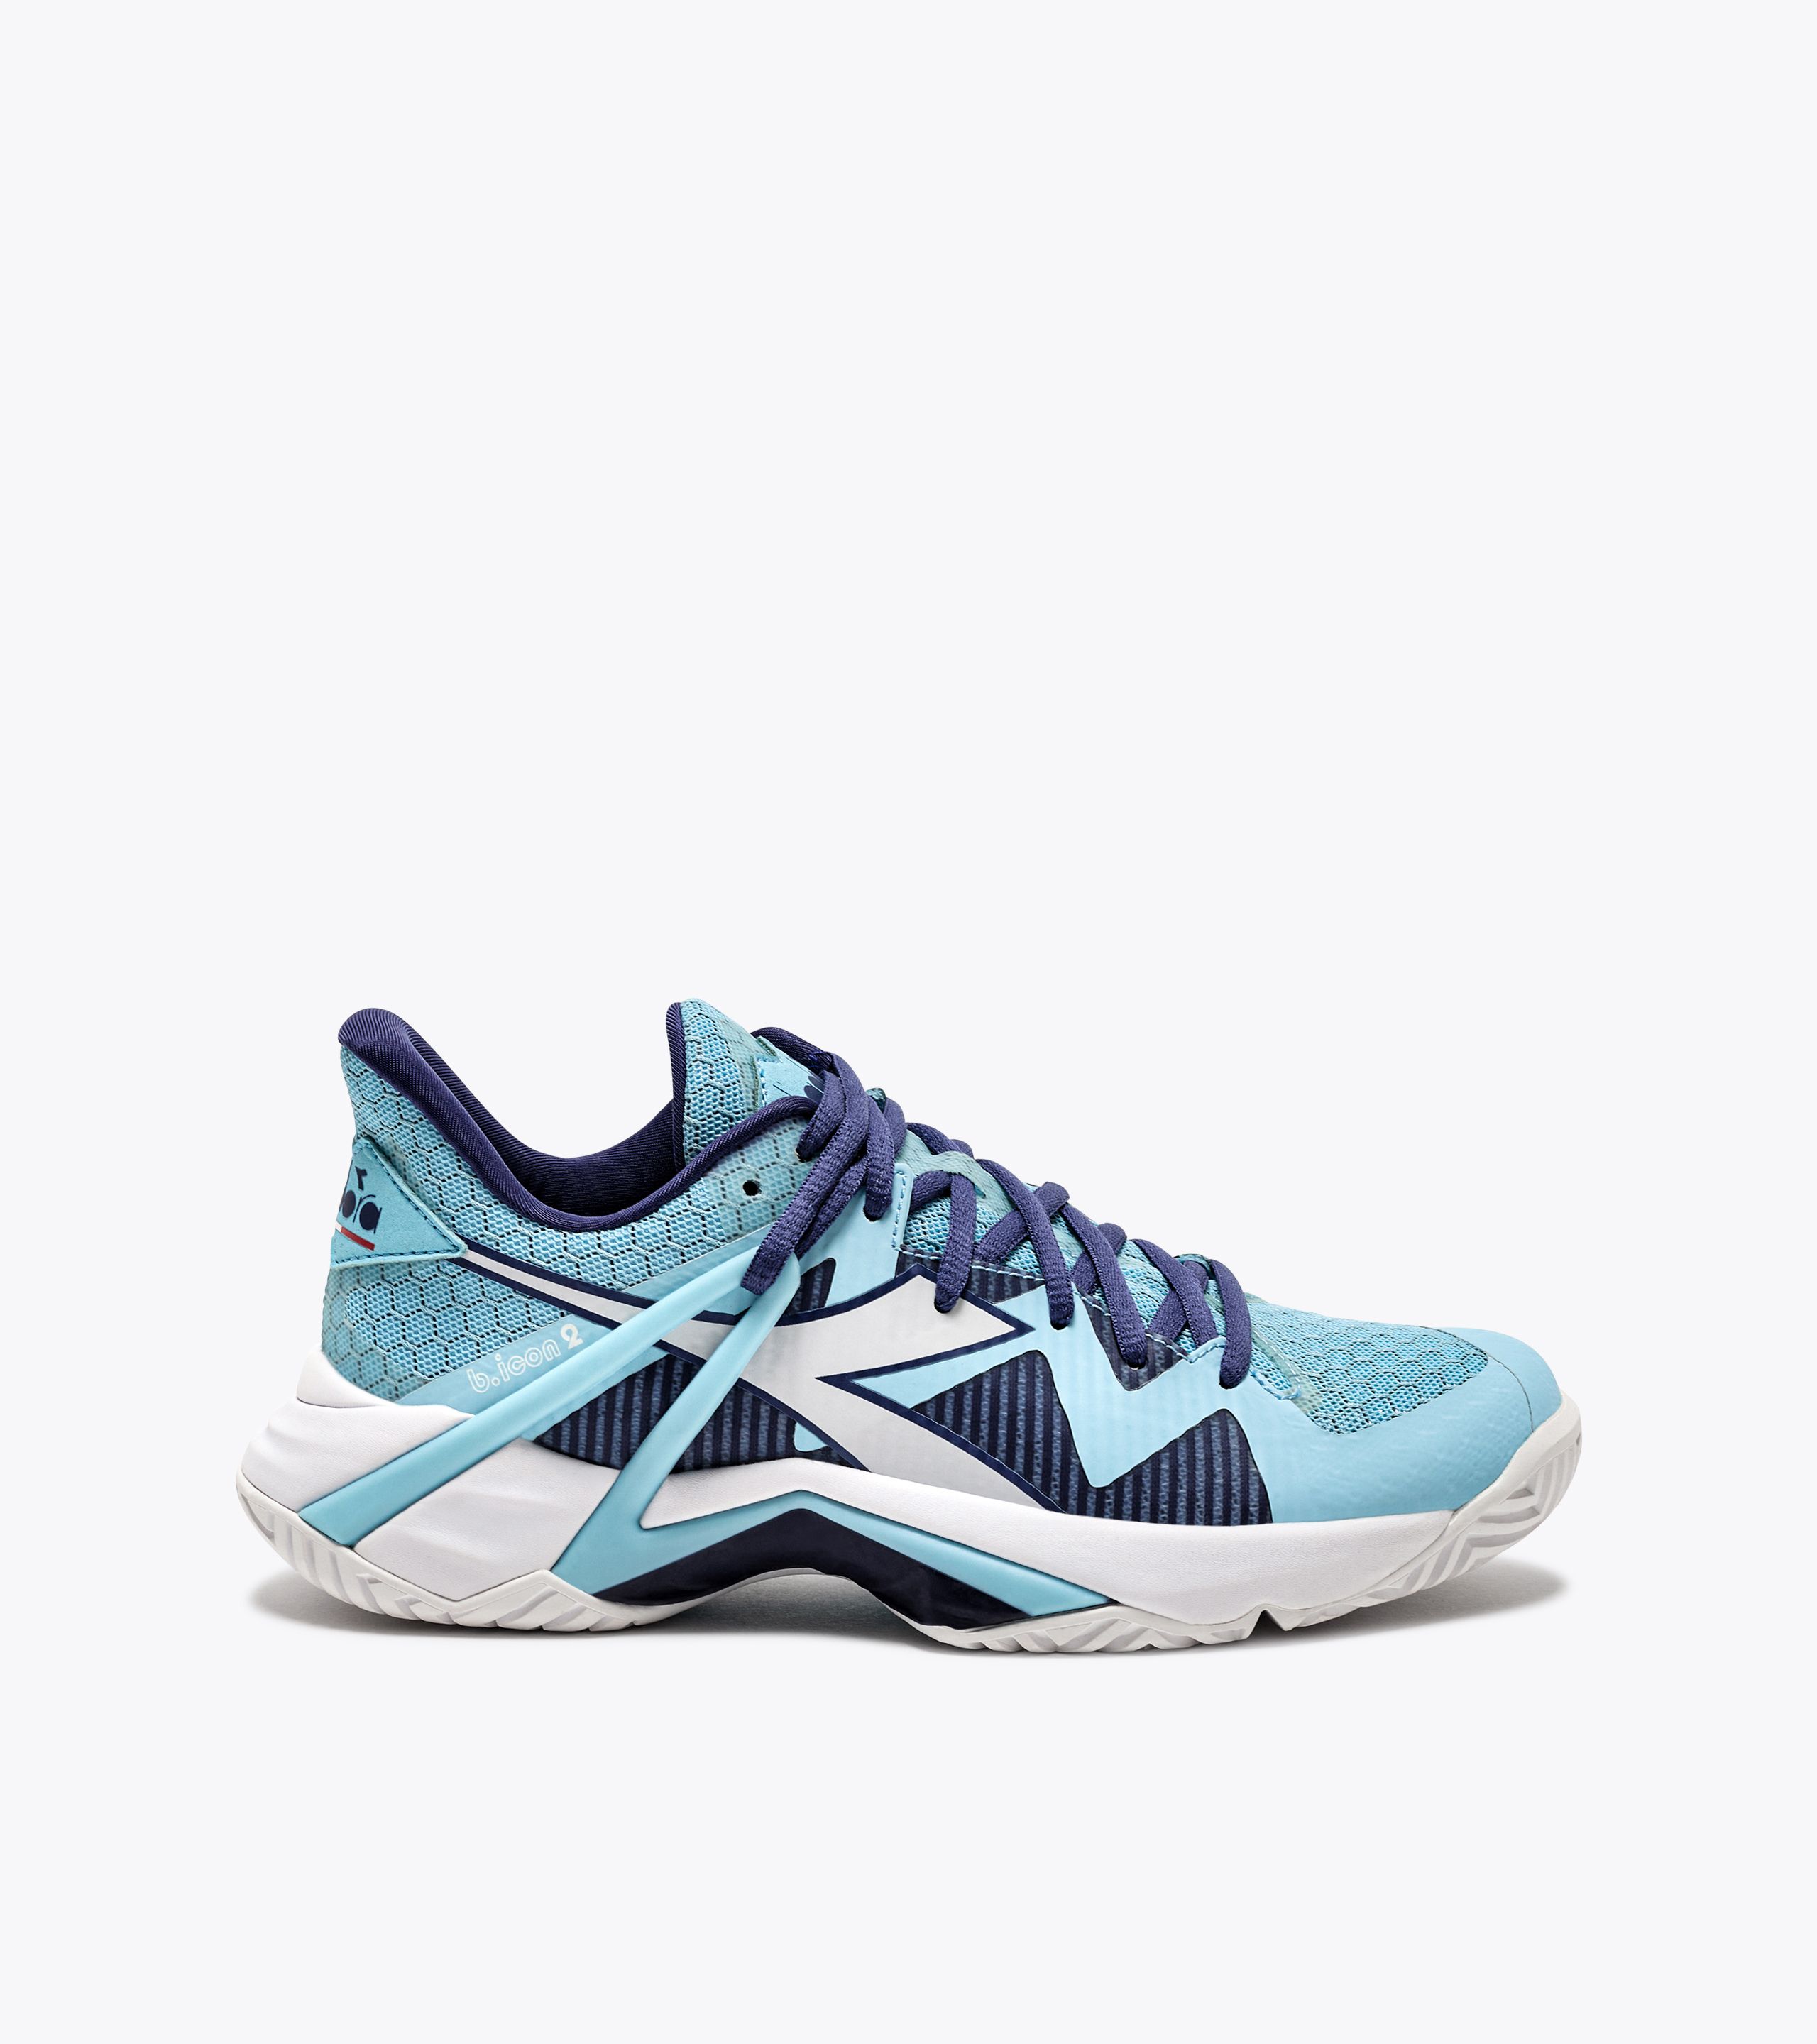 B.ICON 2 W AG Tennis shoes for hard surfaces or clay courts - Women -  Diadora Online Store